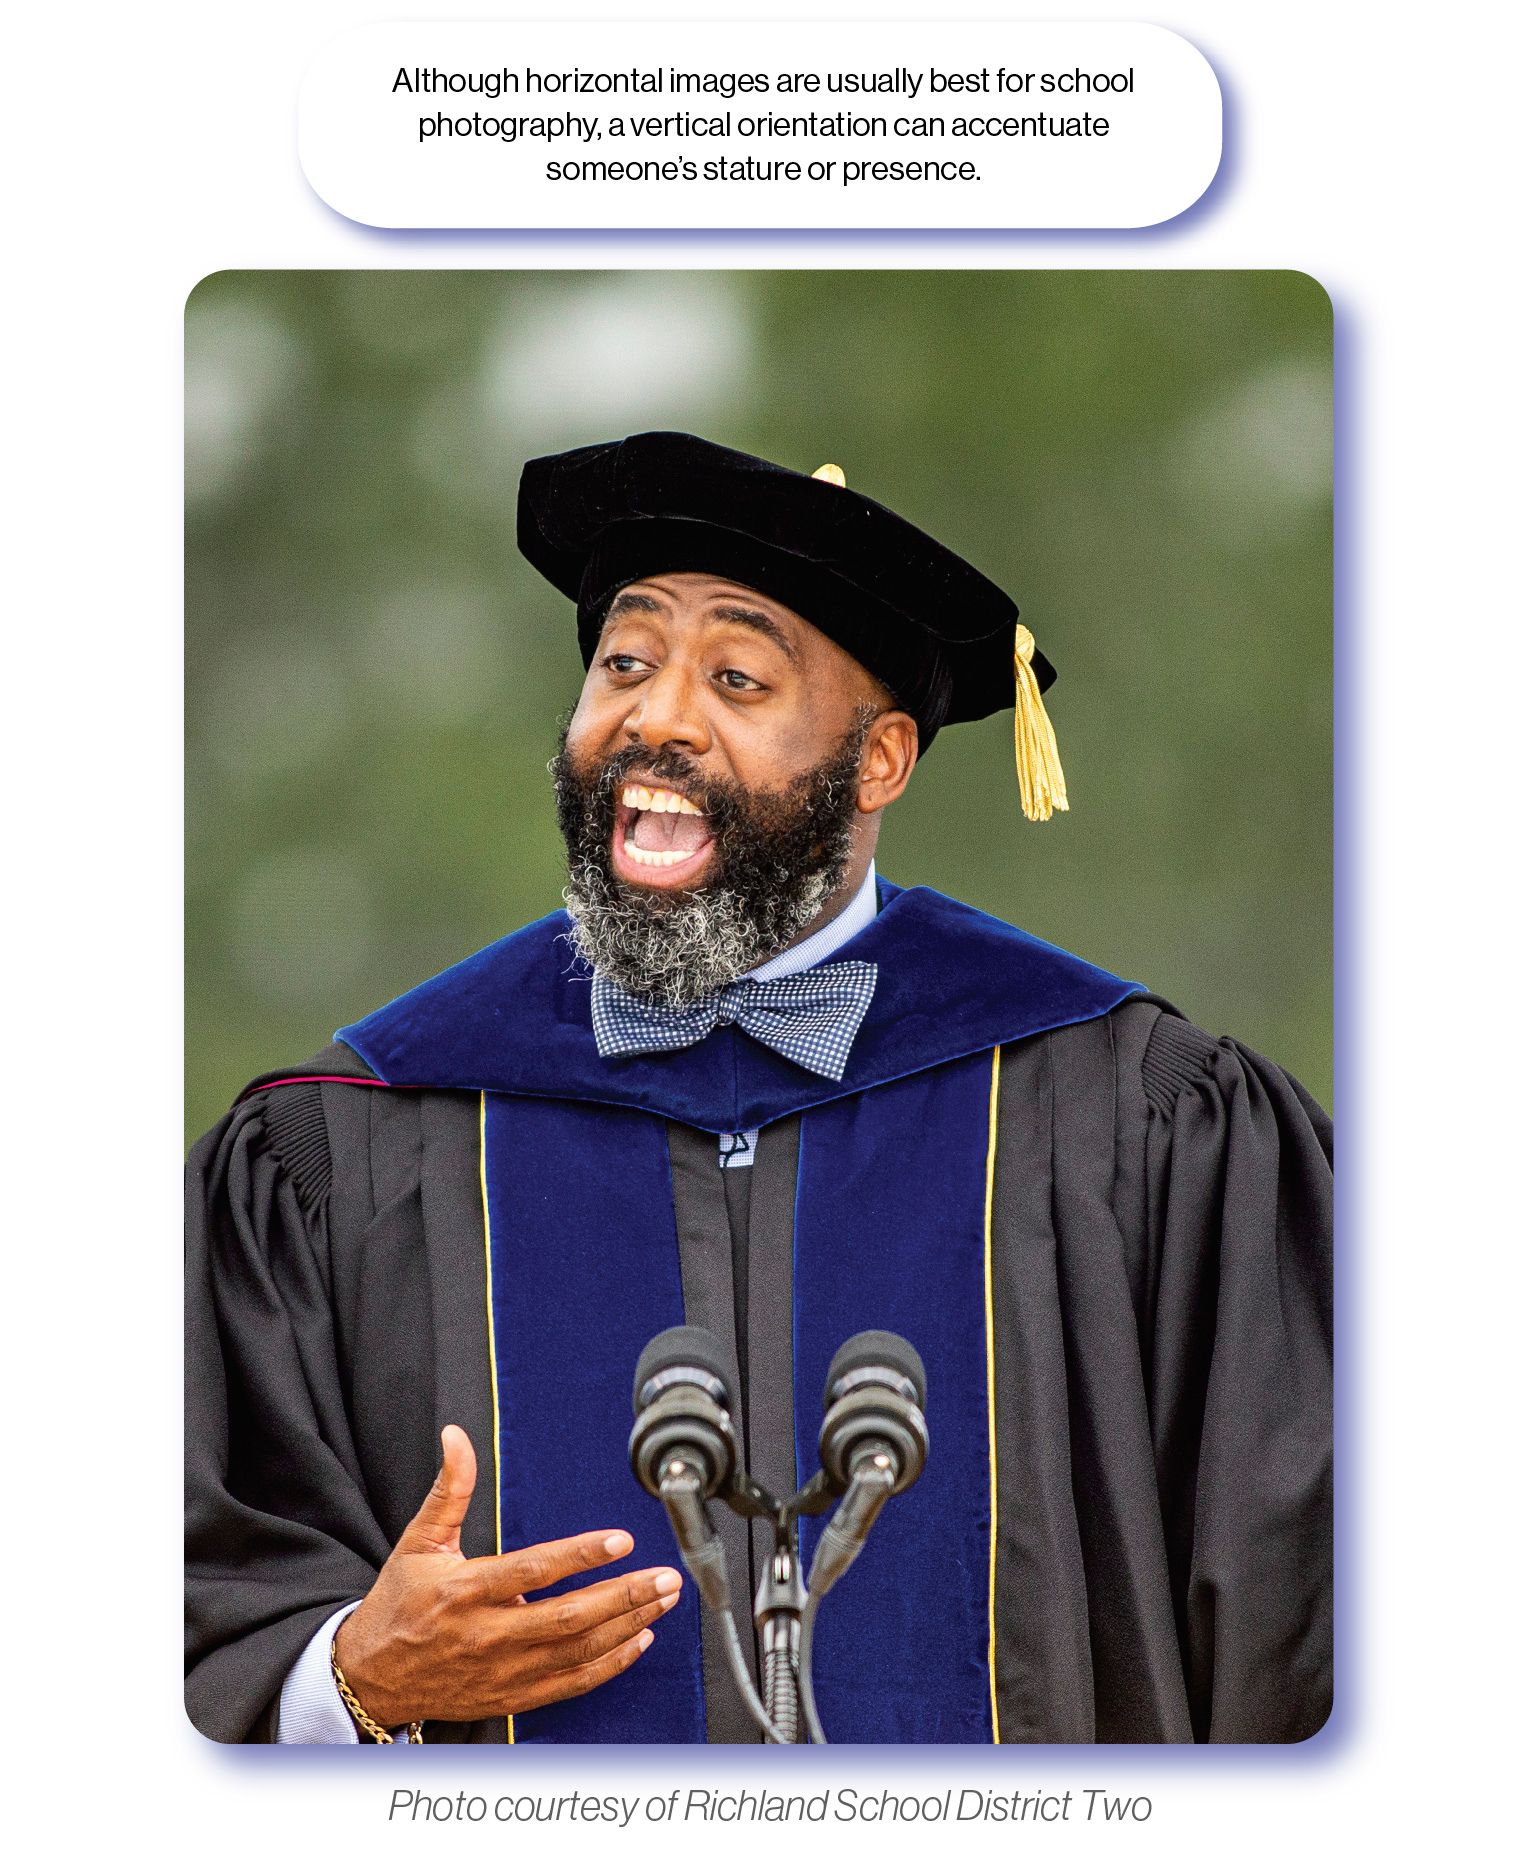 Image: A picture of Superintendent Dr. Baron Davis speaking at a graduation ceremony, with the SchoolCEO caption 'Although horizontal images are usually best for school photography, a vertical orientation can accentuate someone's stature or presence.'